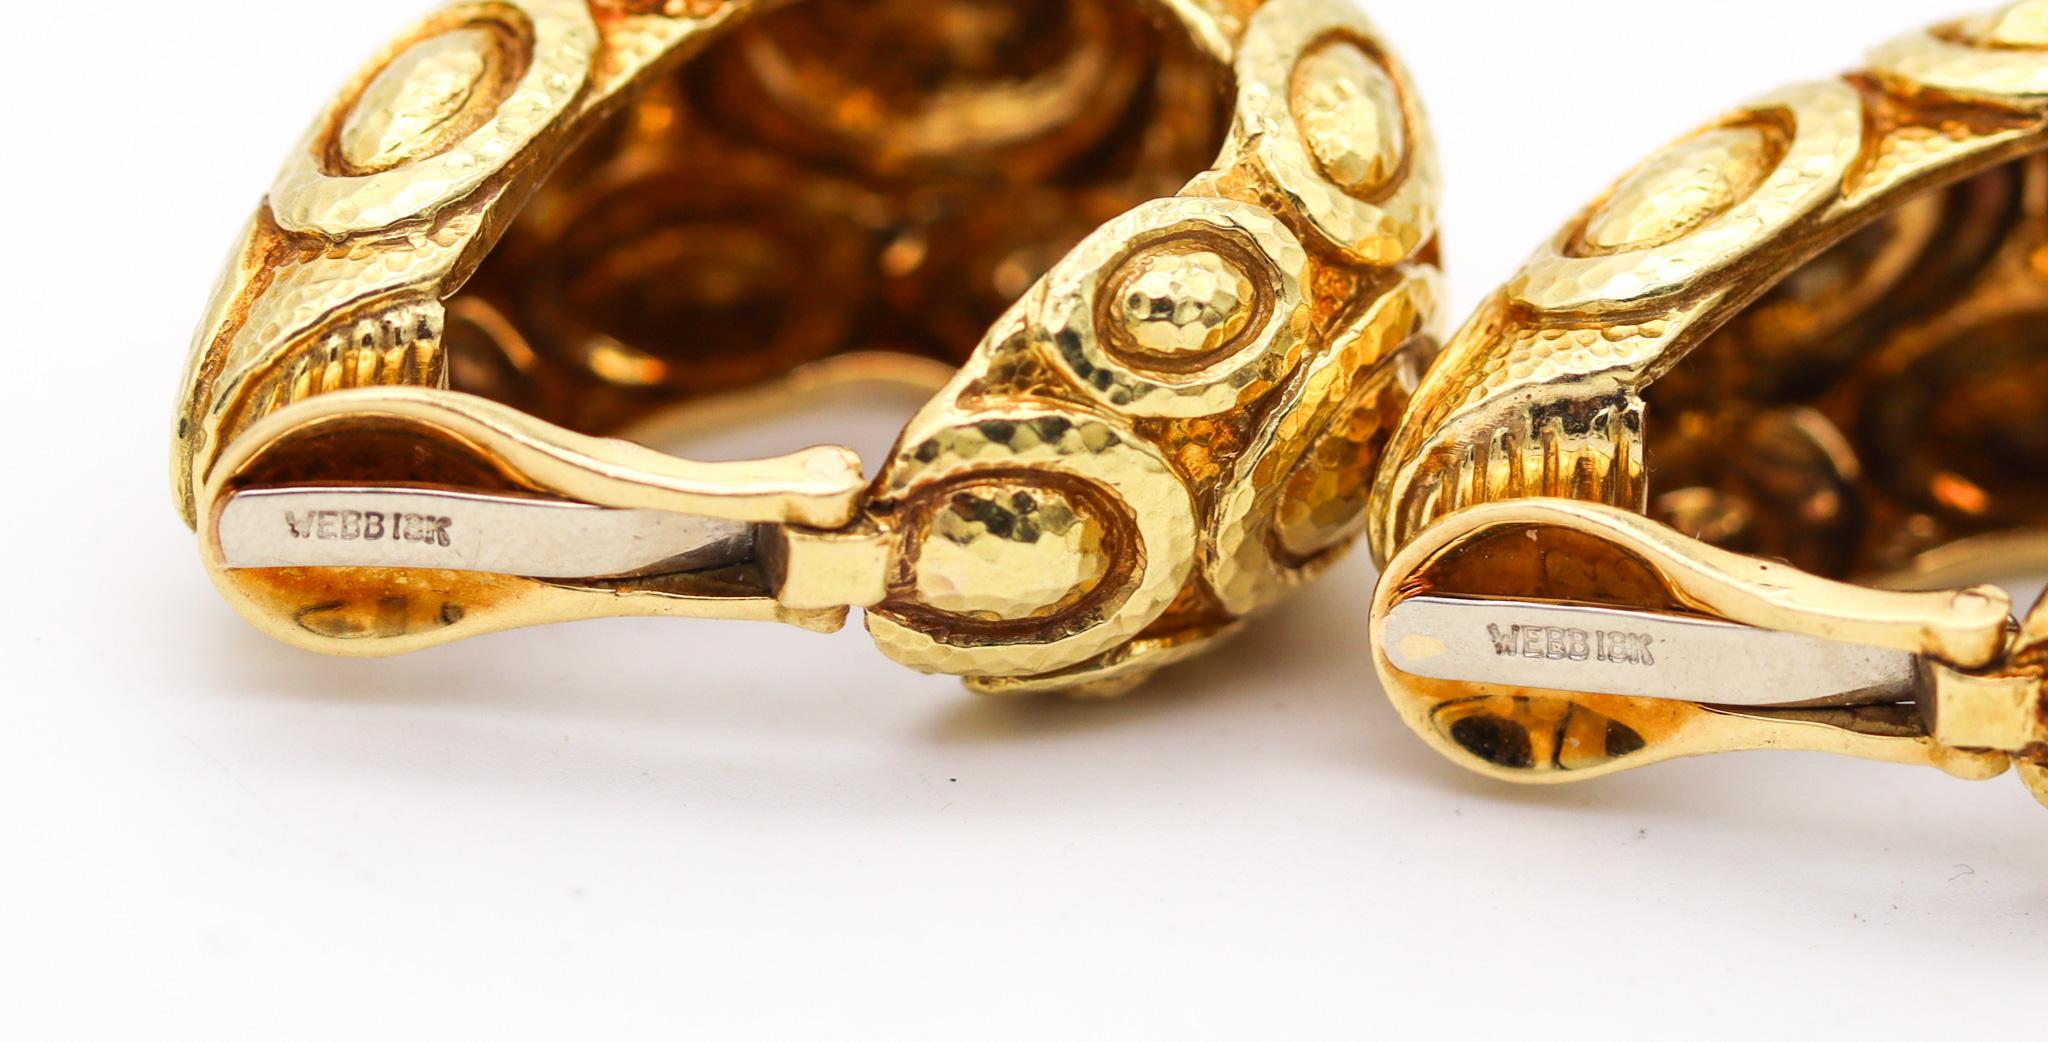 David Webb 1976 Cased Mayan Hoop Clips Earrings In Solid 18Kt Yellow Gold In Excellent Condition For Sale In Miami, FL